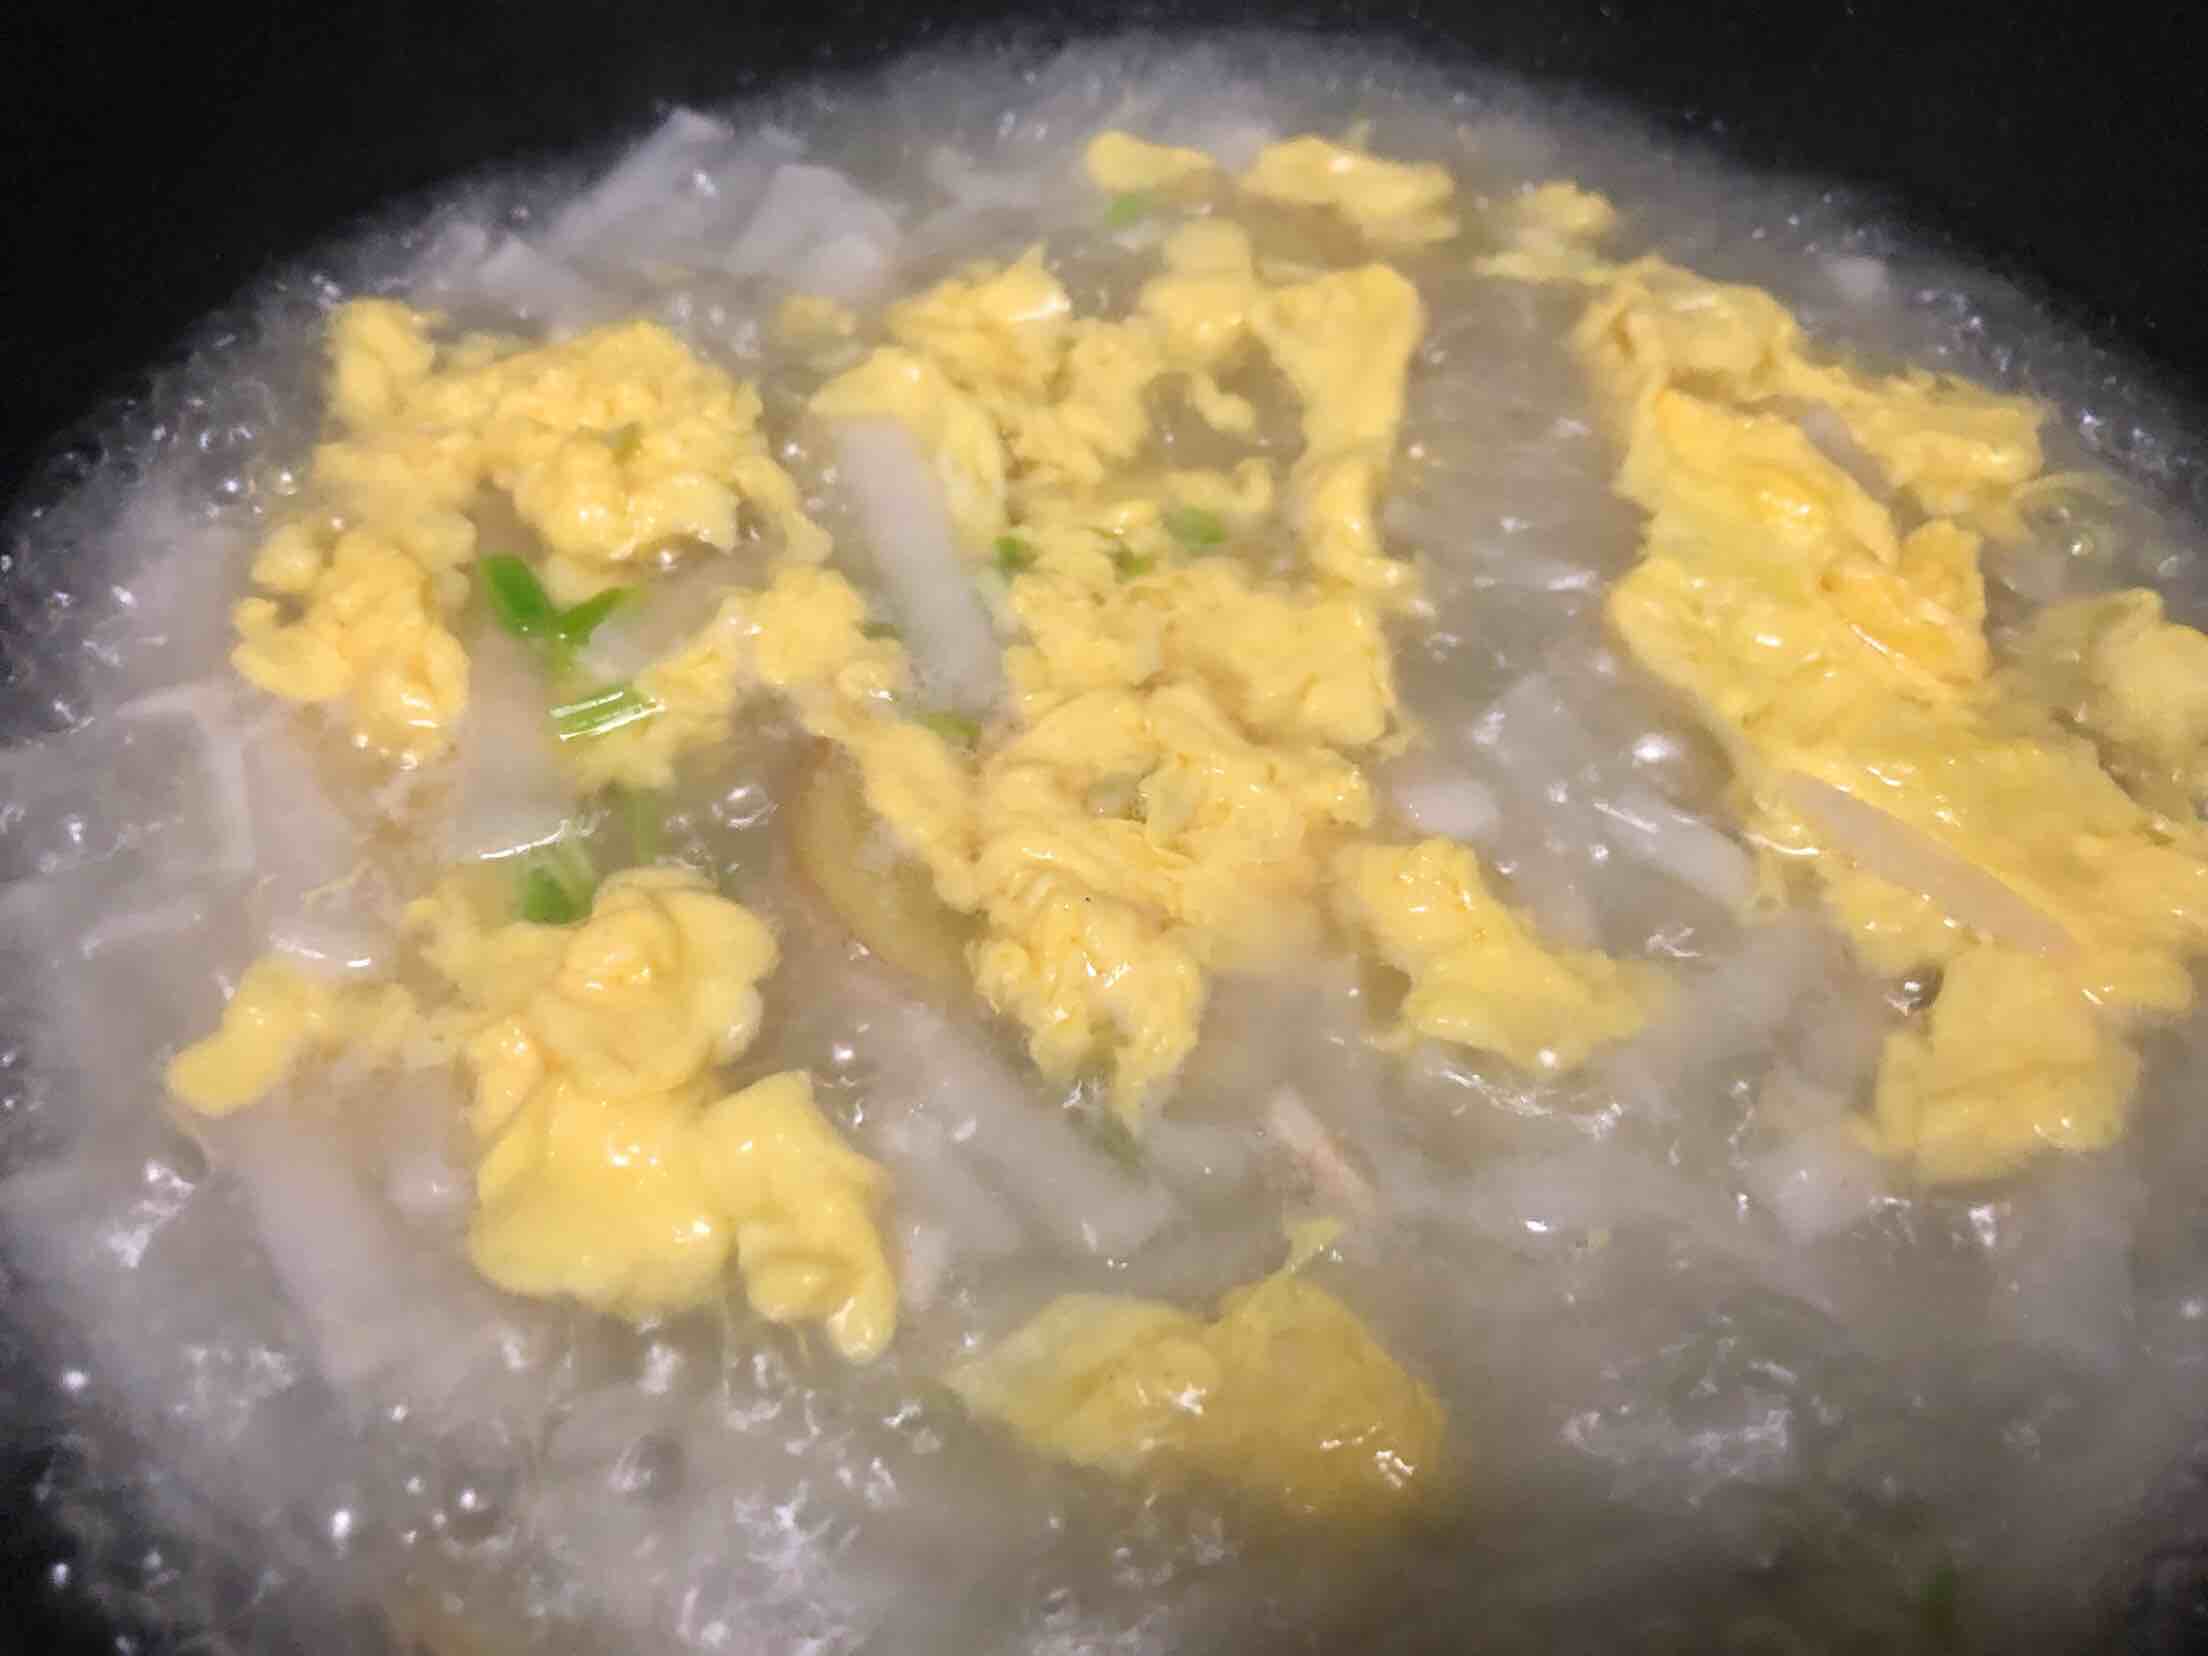 Turnip and Egg Soup recipe